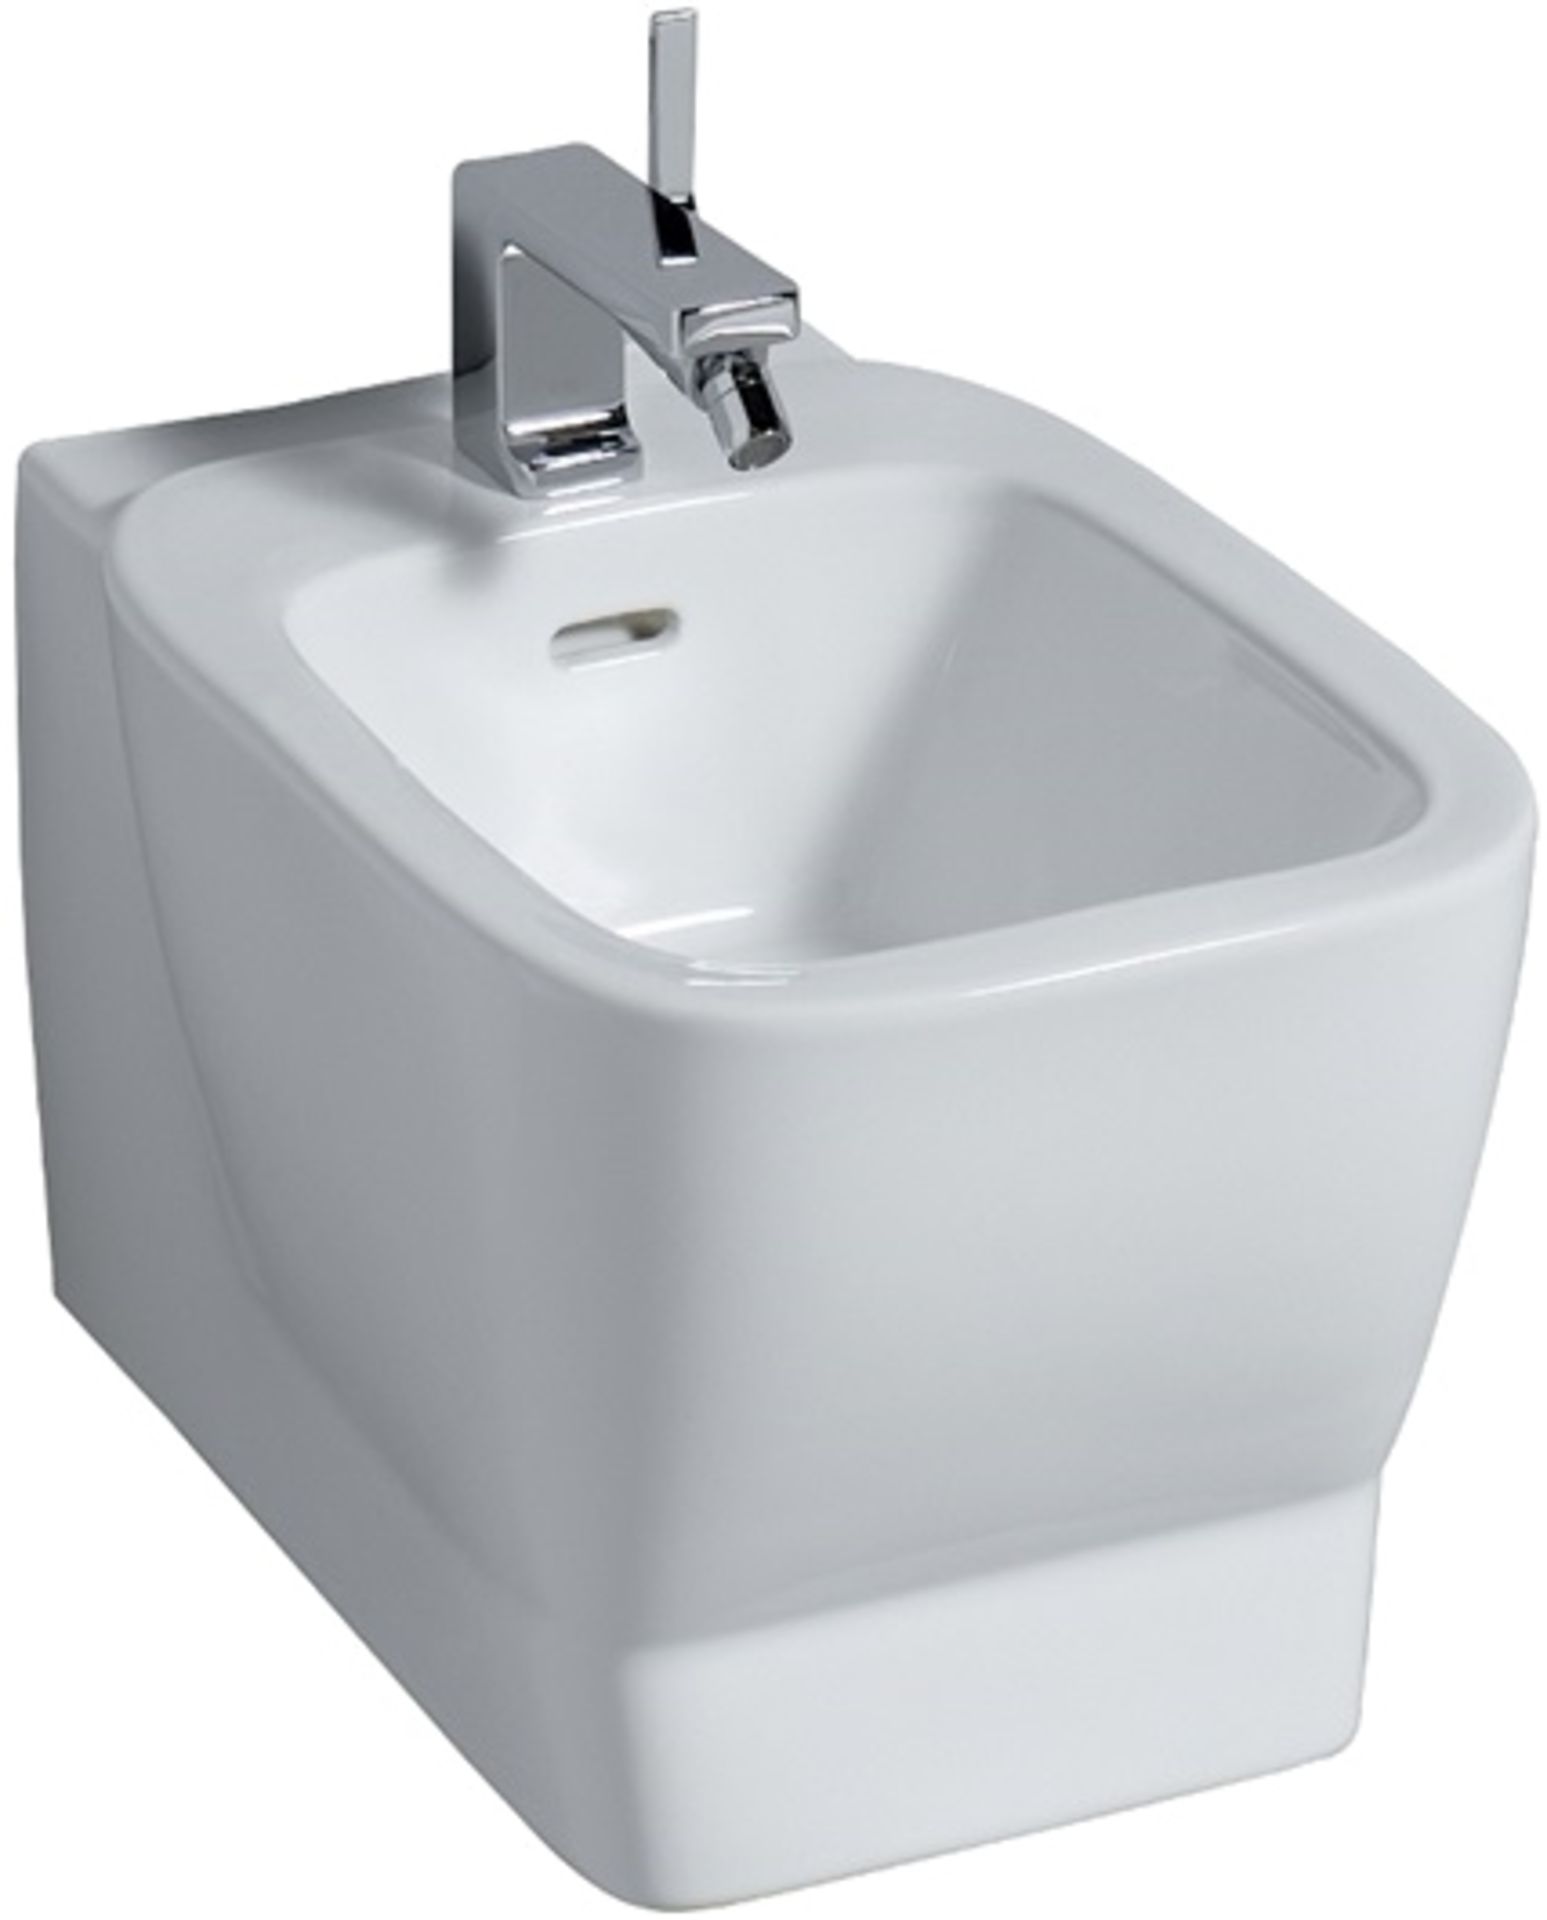 (XL38) Silk 540mm Bidet. RRP £369.99. The Silk bathroom collection is packed with many thought...( - Image 2 of 5